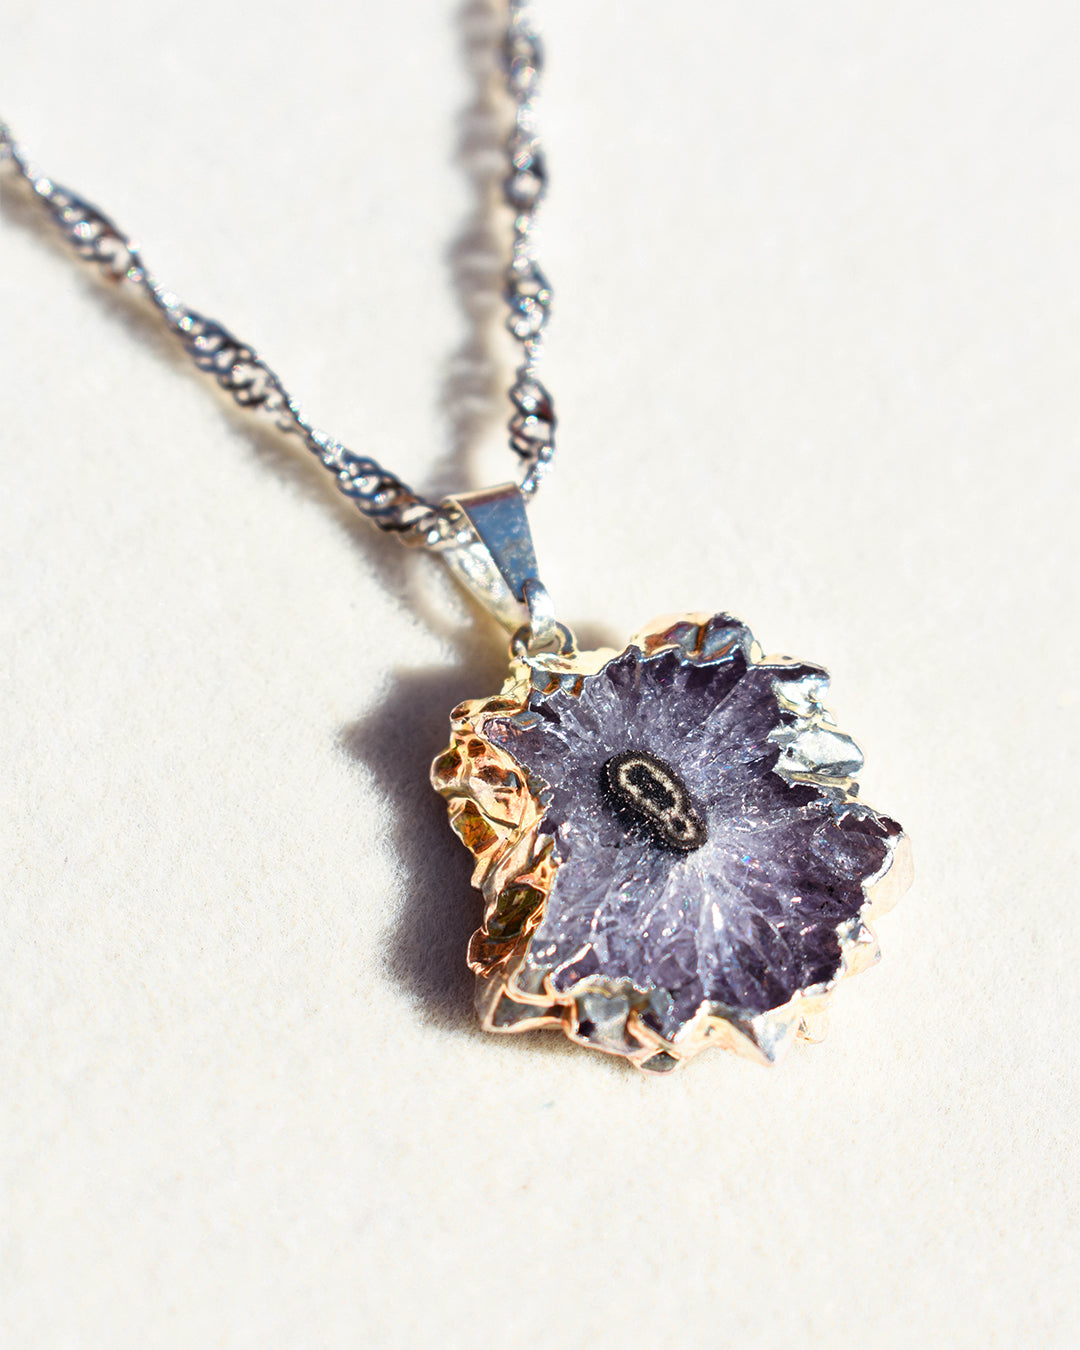 Stainless Steel chain with Flower Amethyst crystal pendant